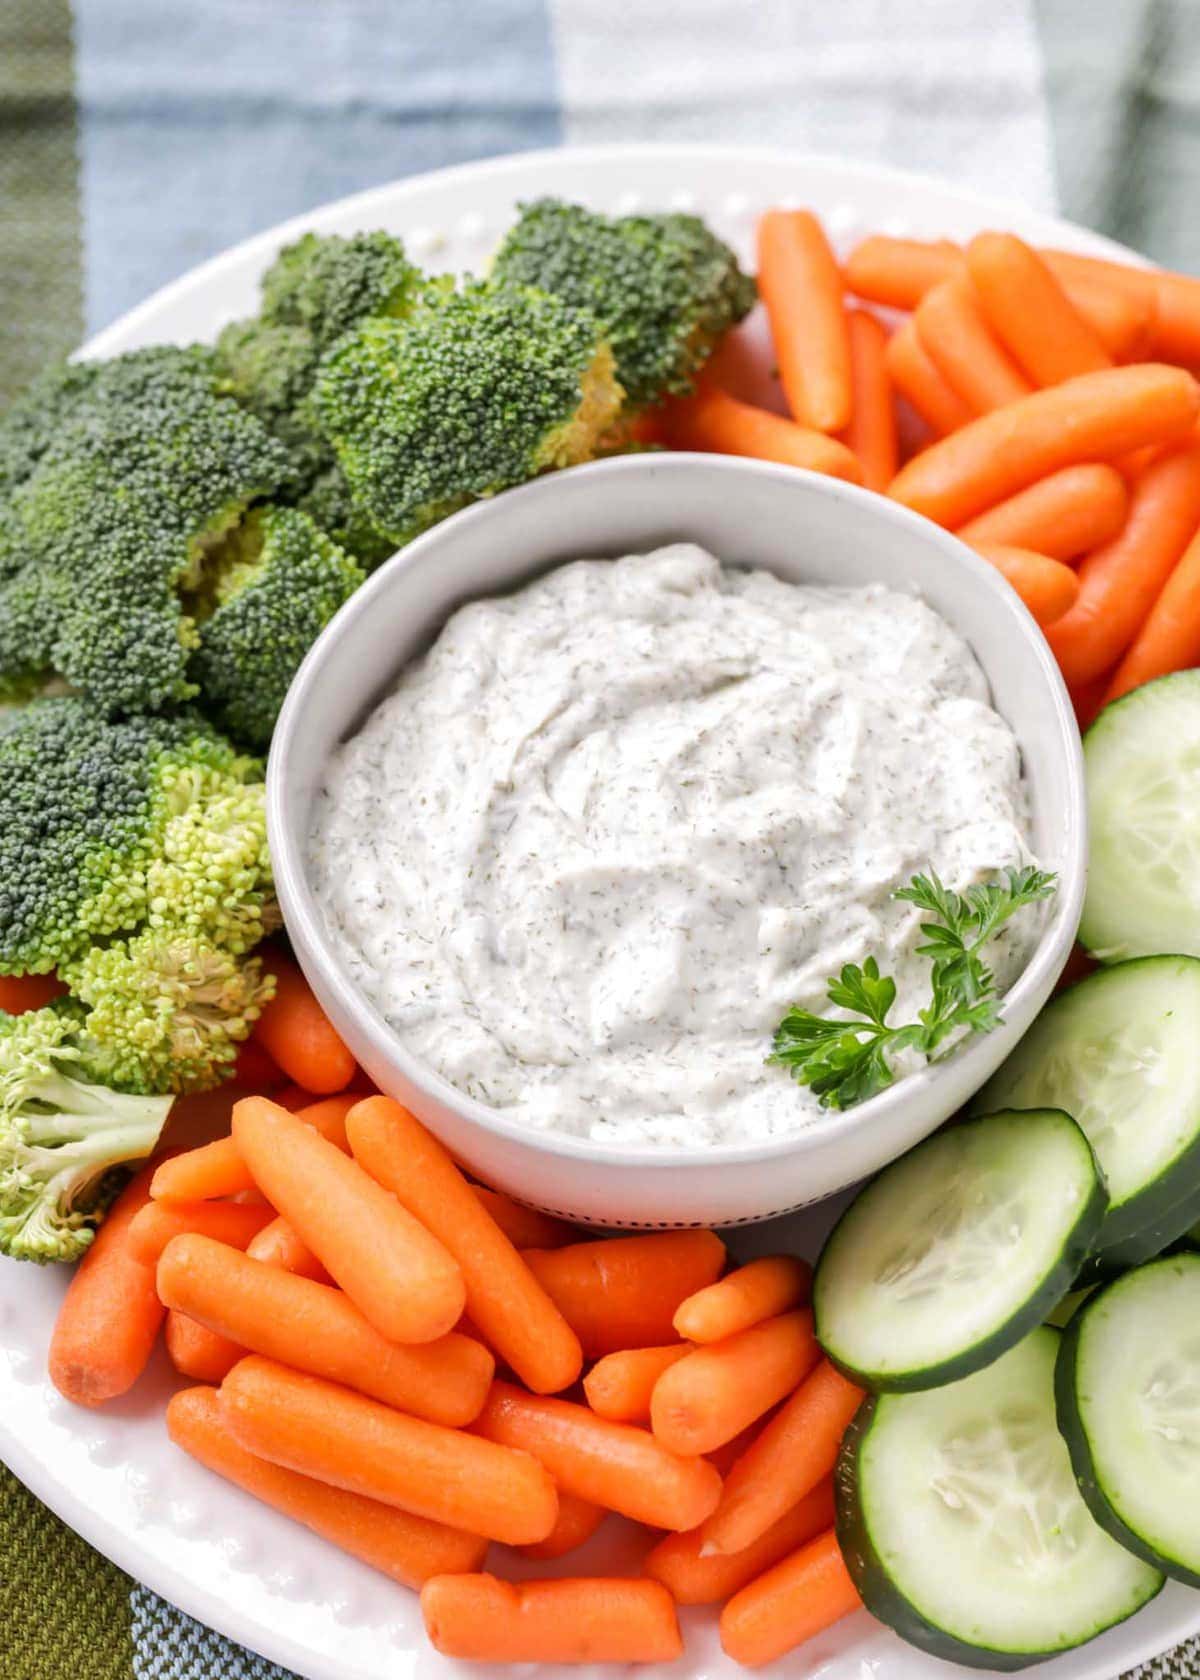 Dill Vegetable dip recipe in white bowl with veggies